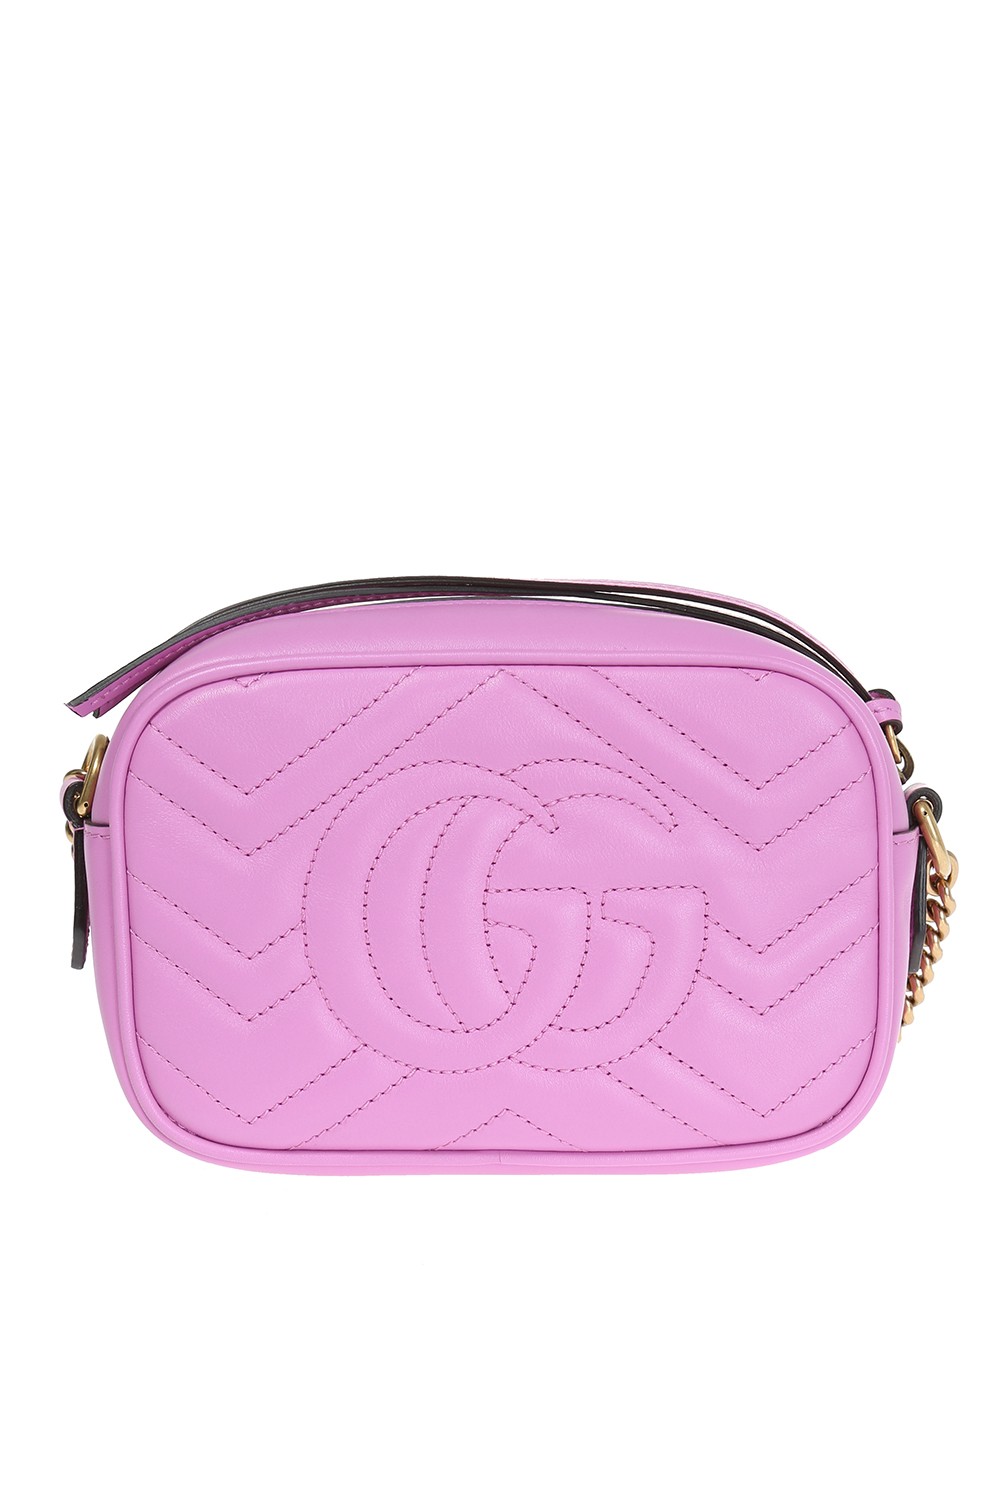 Gucci GG Marmont Bag Matelasse Small GG Marmont Tote Candy Pink